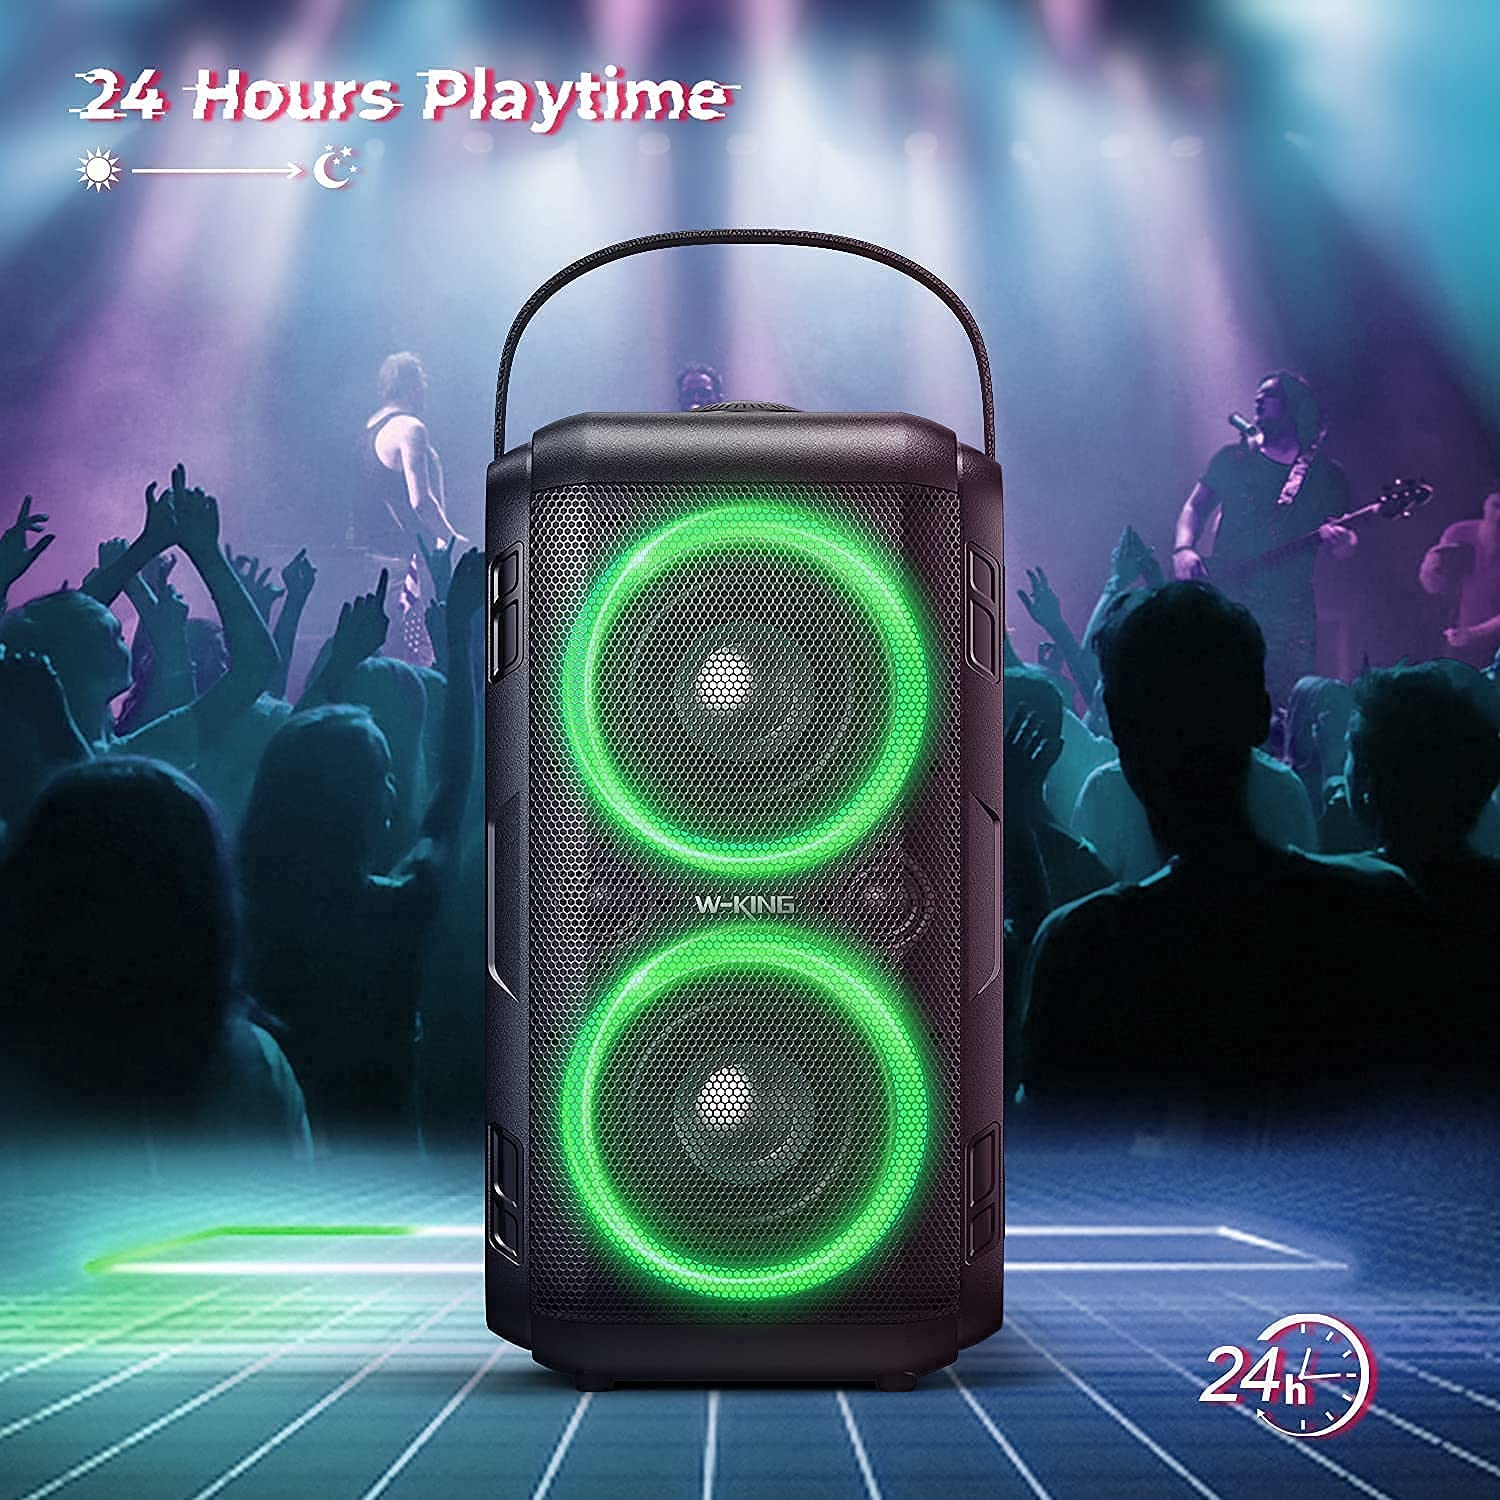 W-KING 80W Super Punchy Bass Portable Wireless Speakers | T9